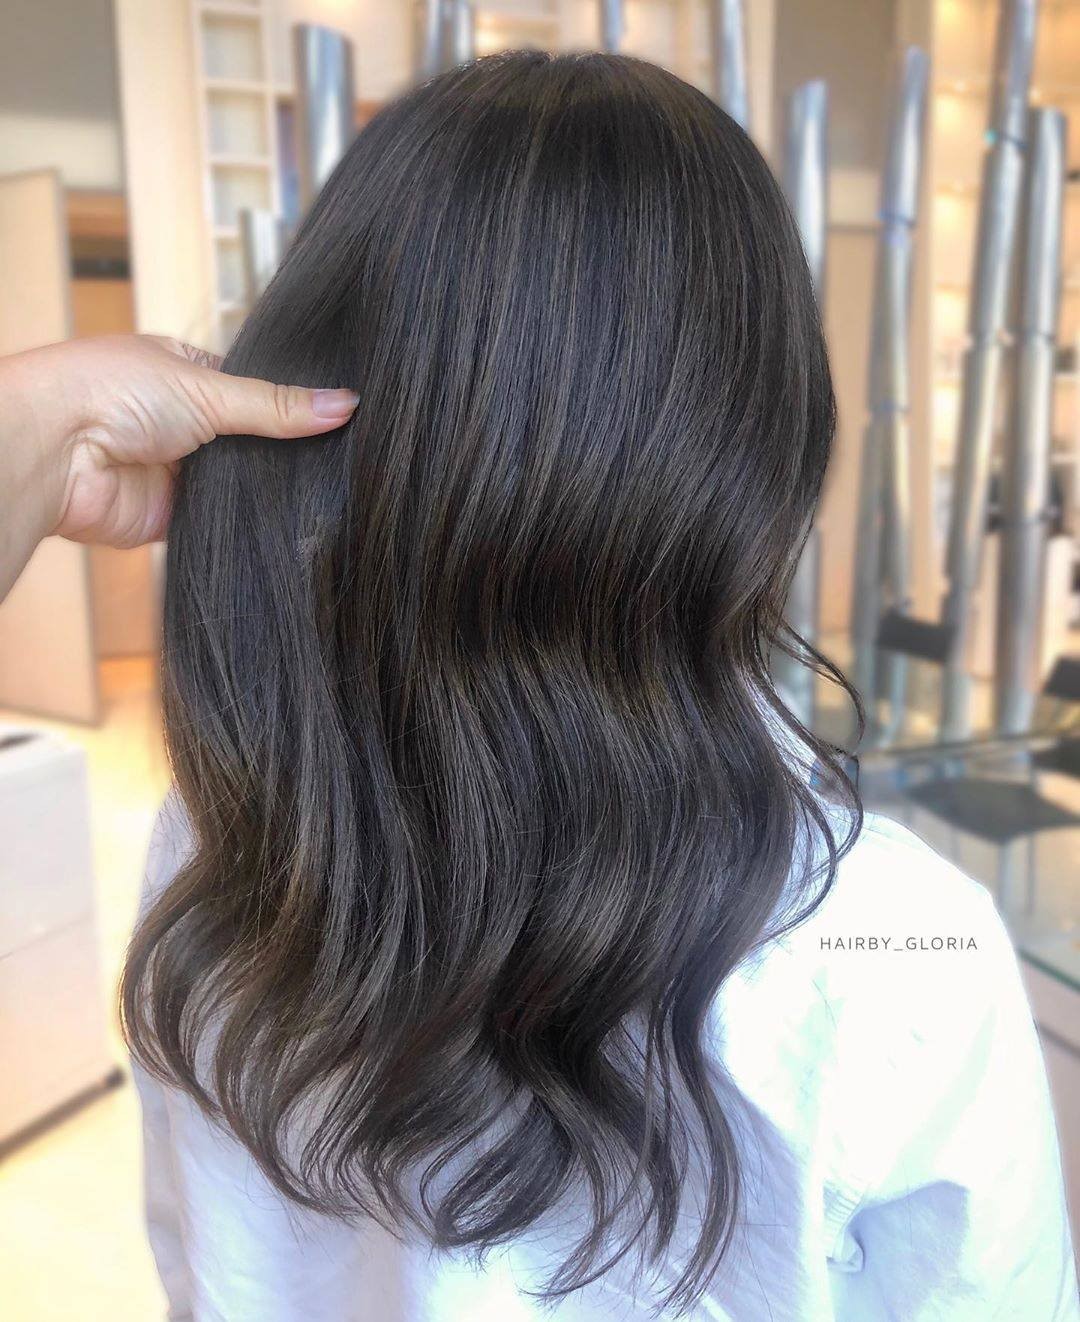 Matrix - Dark Desires 🖤

Soft babylights are perfect for those dark #brunette clients who want a low maintenance color. Help them to preserve their hue at-home by using our #DarkEnvy green pigmented c...